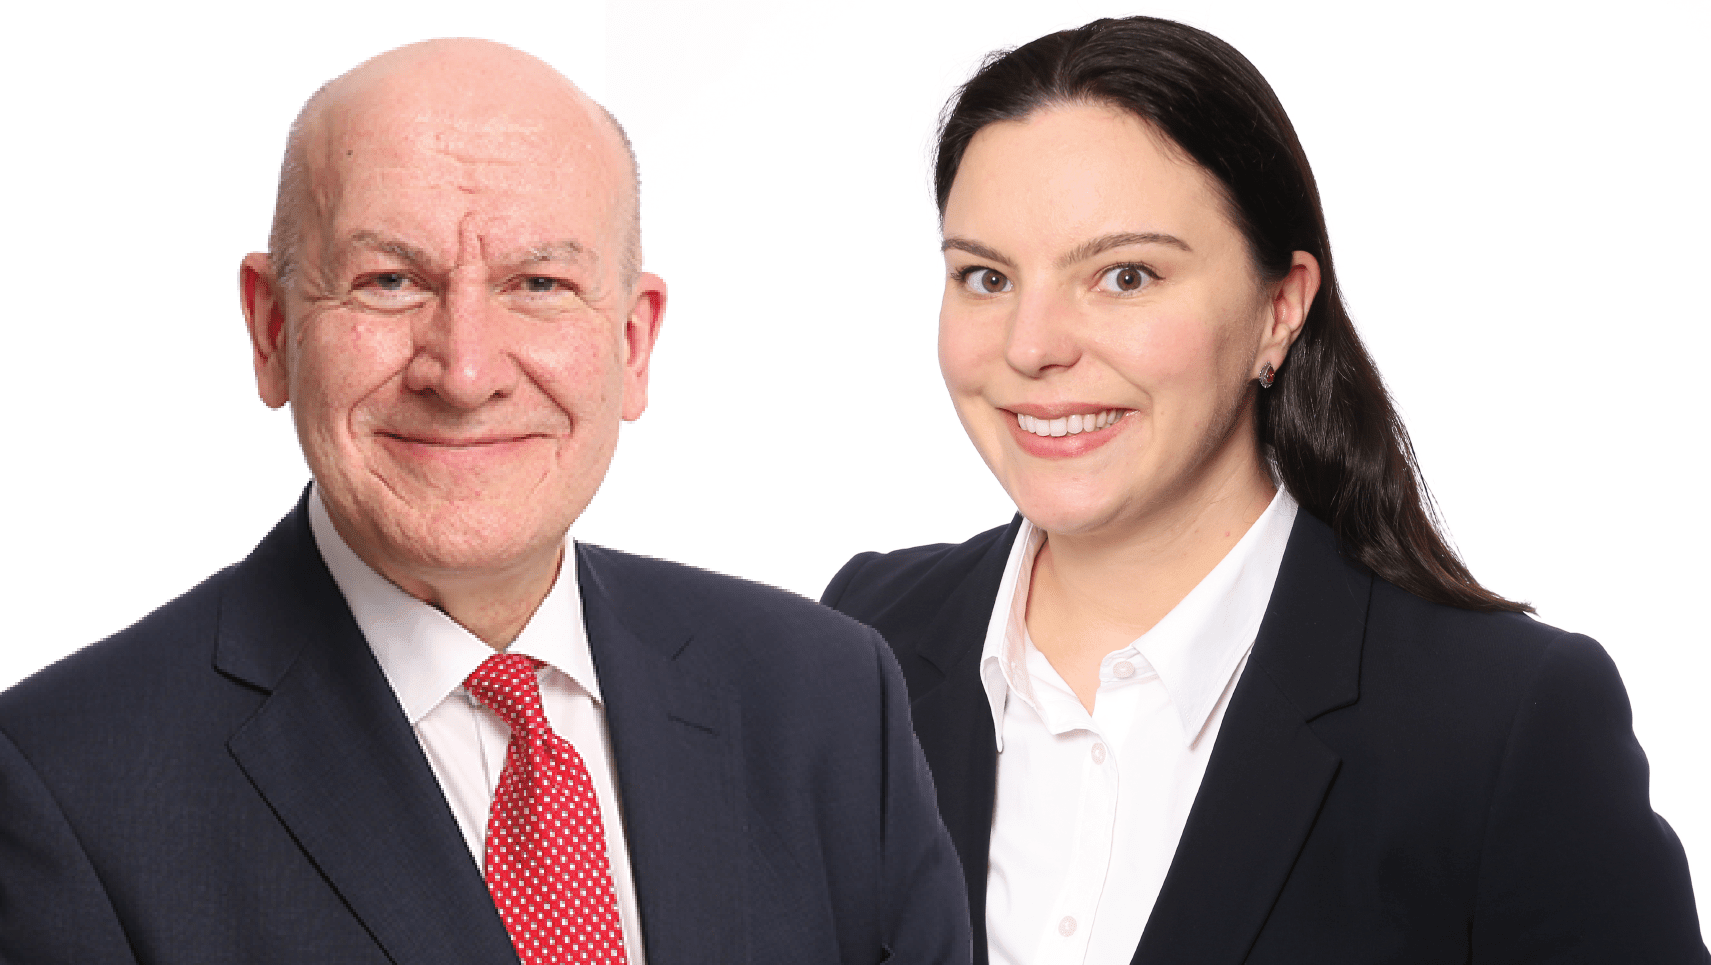 Christopher Katkowski QC and Constanze Bell Helped to Secure Planning Permission for 1080 New Homes at Sandleford Park